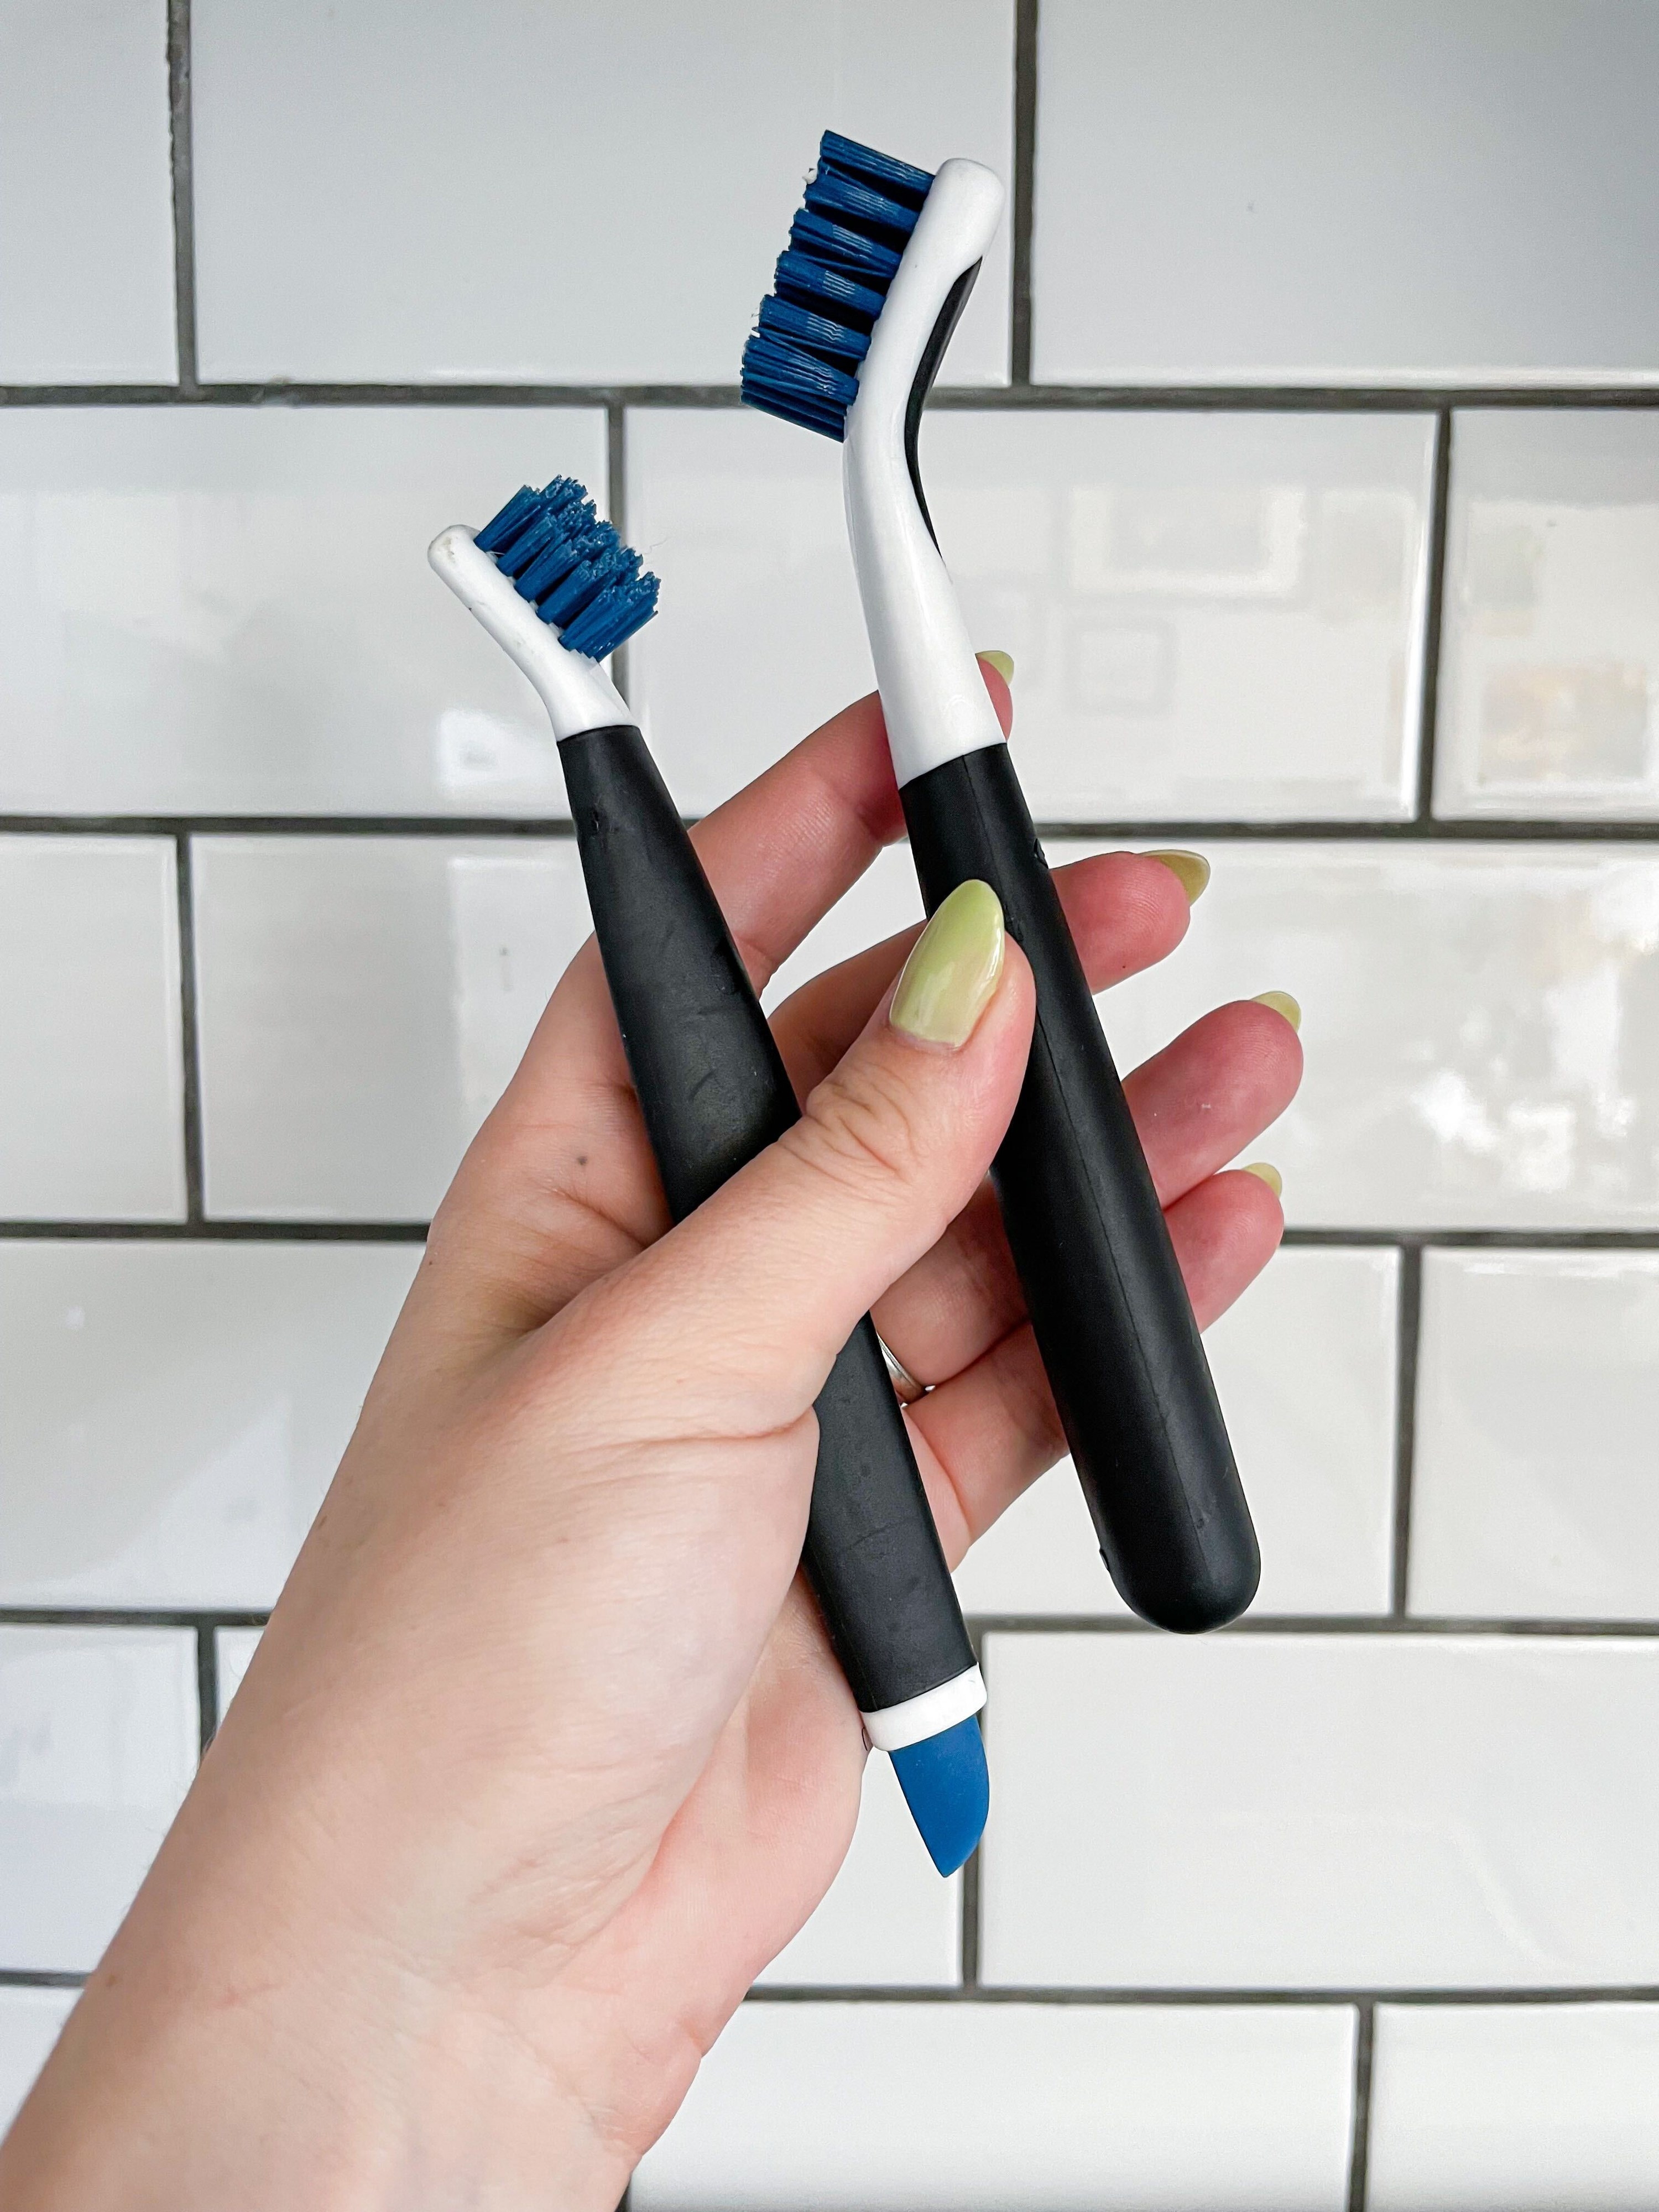 A person holding up the two mini scrubbing brushes against a subway tile backdrop